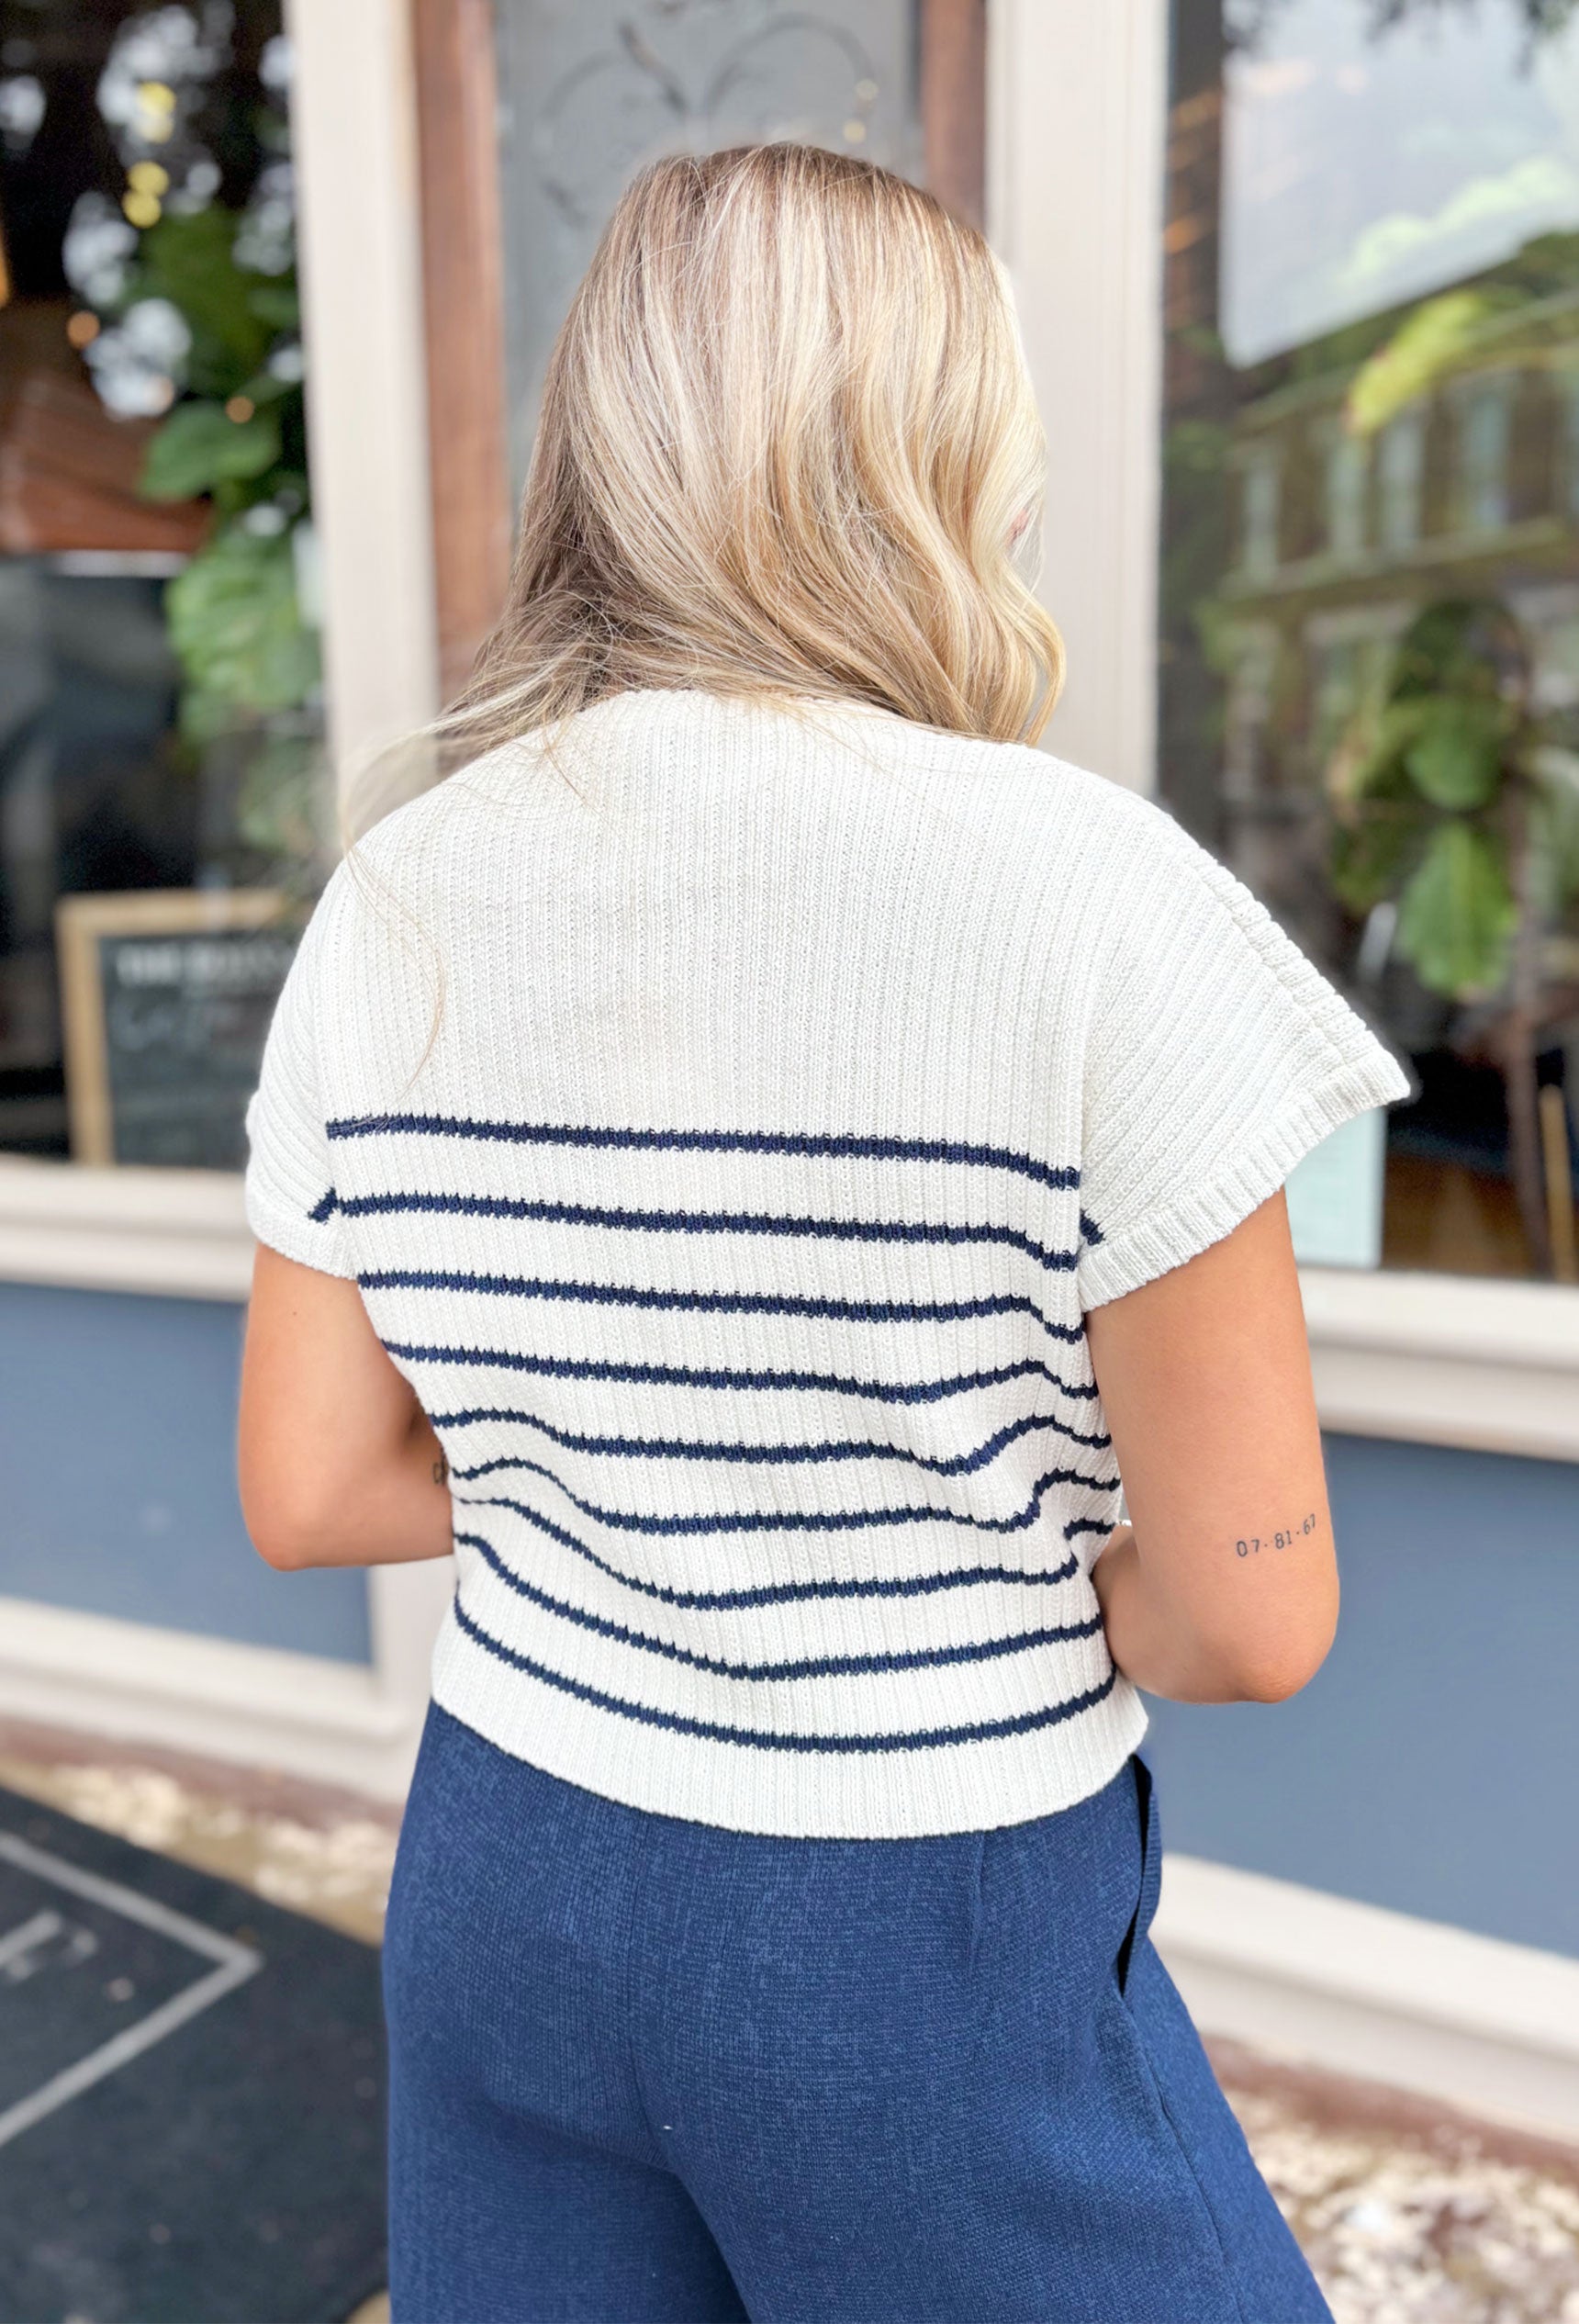 Take The Hint Sweater In Navy, white and navy striped knit short sleeve top with a mock neck 